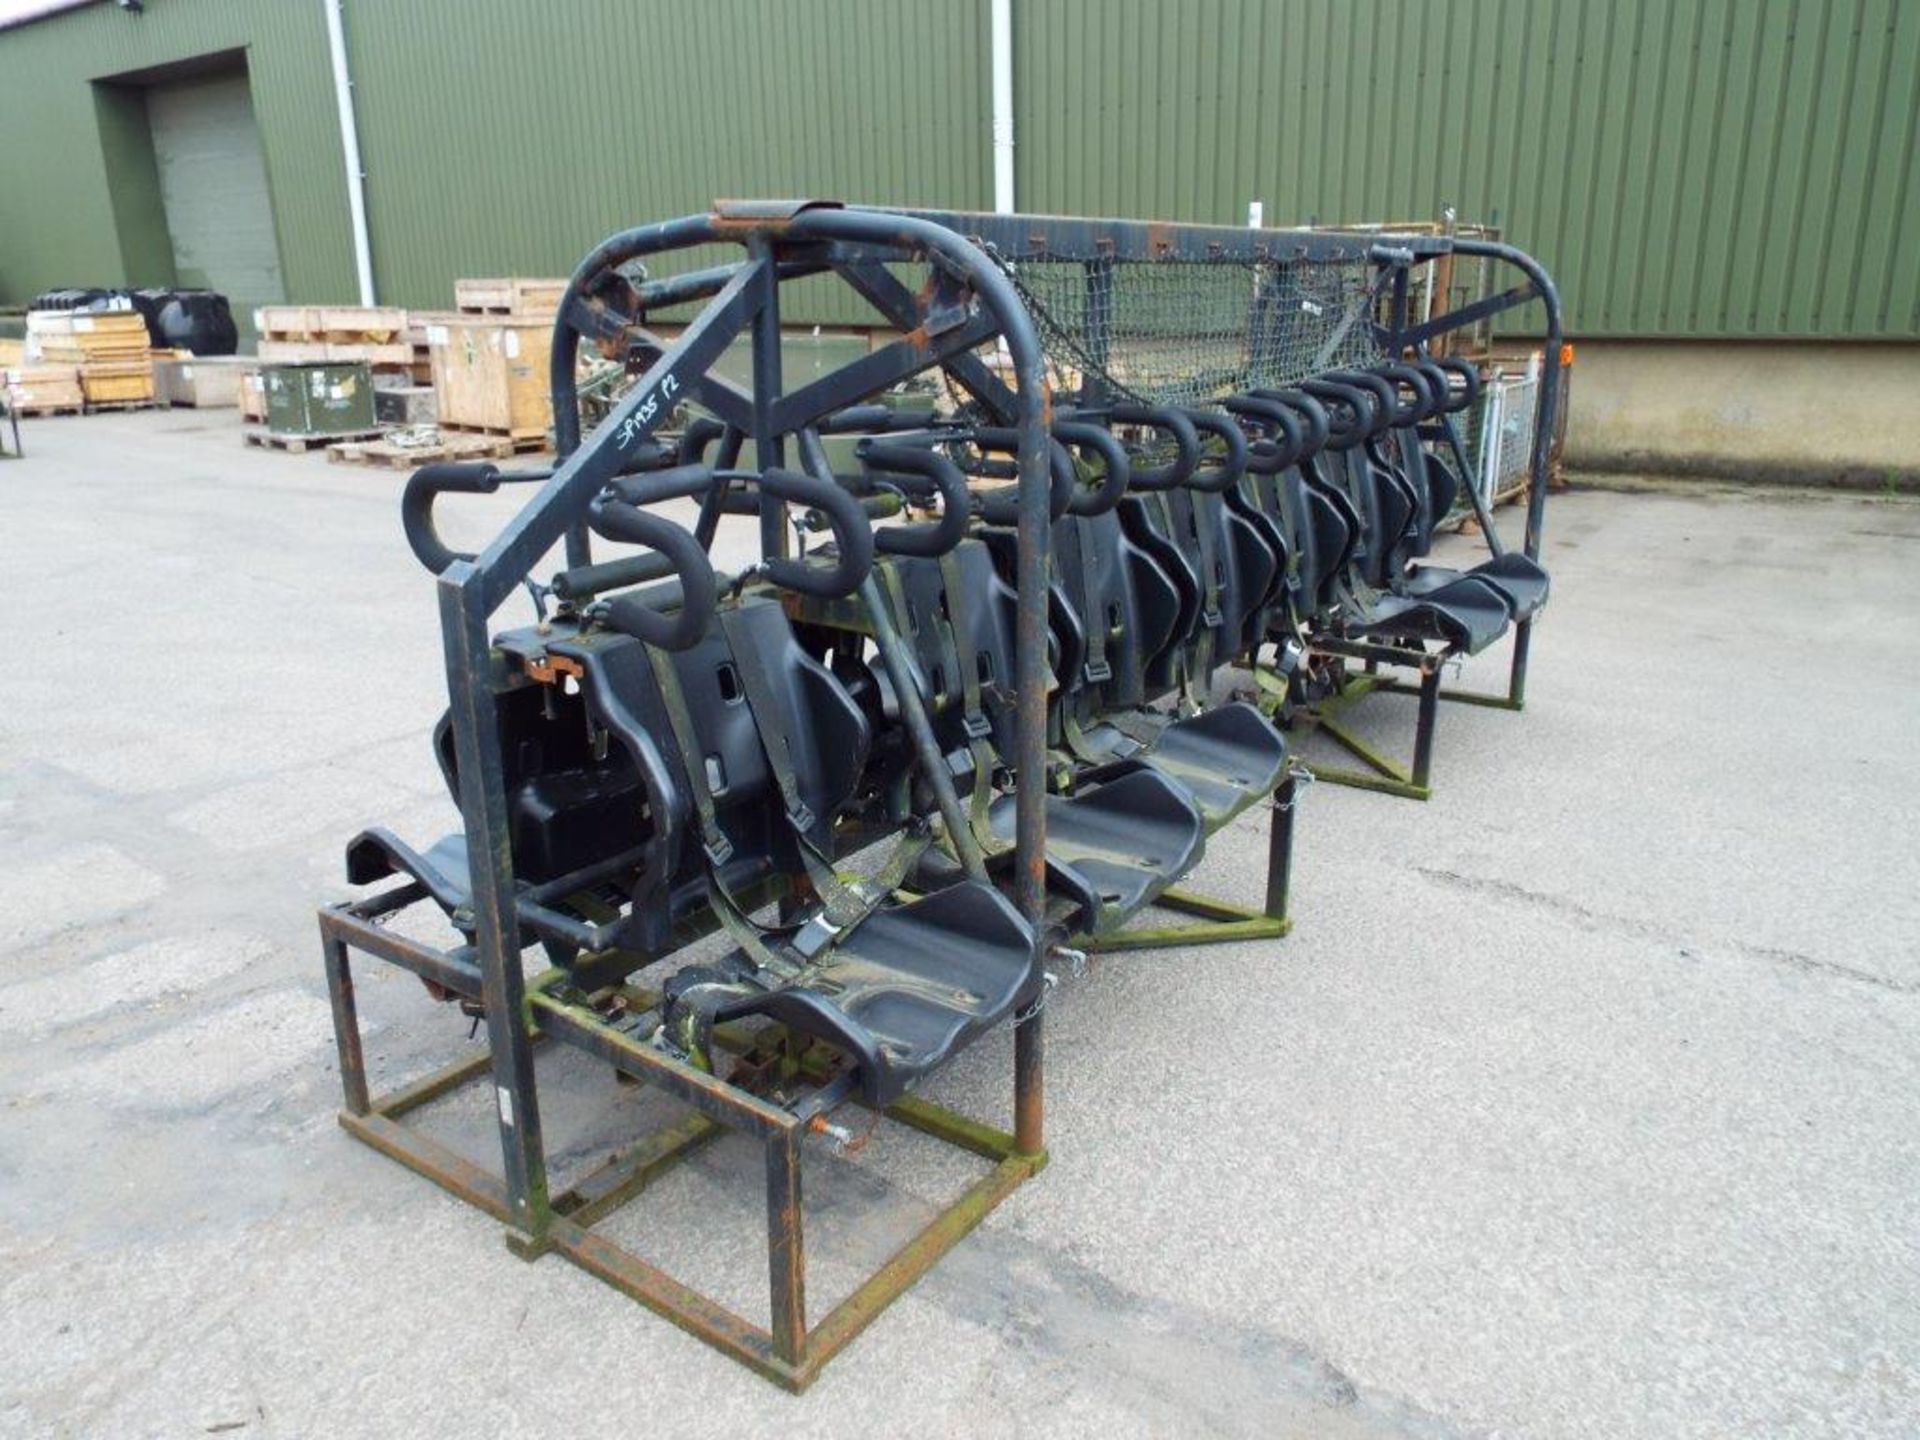 14 Man Security Seat suitable for Leyland Dafs, Bedfords etc - Image 2 of 8